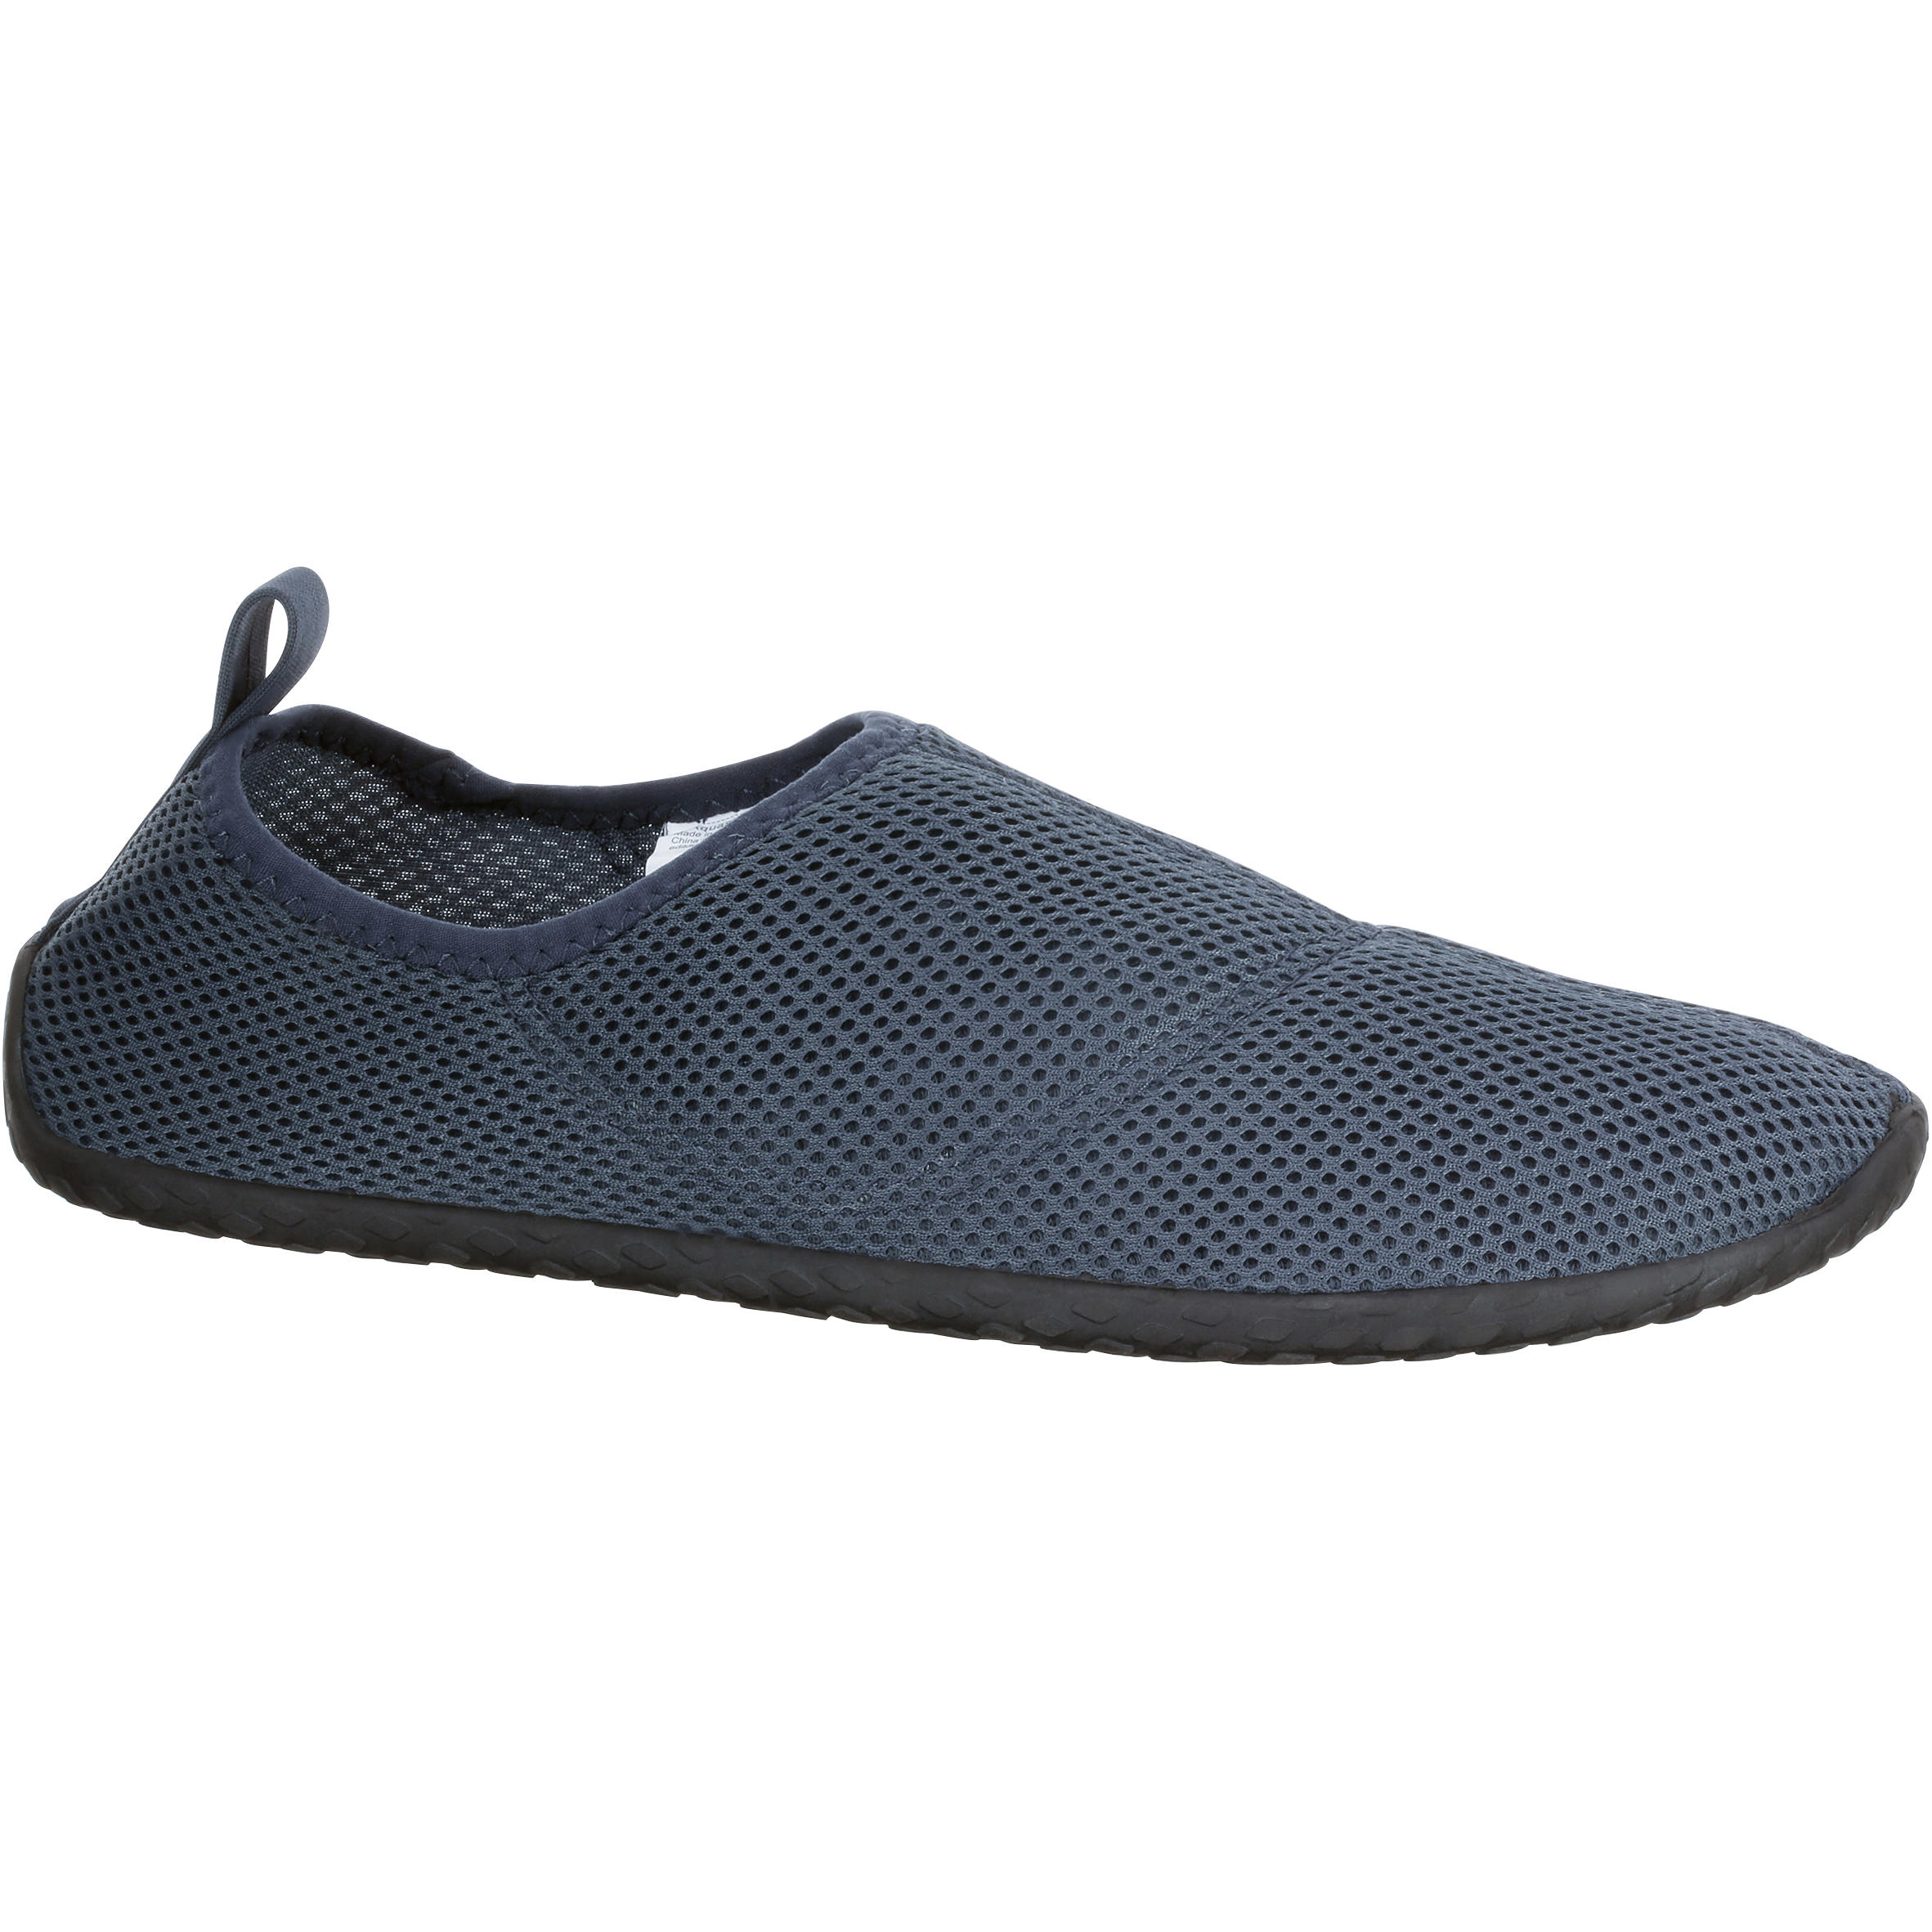 water shoes online